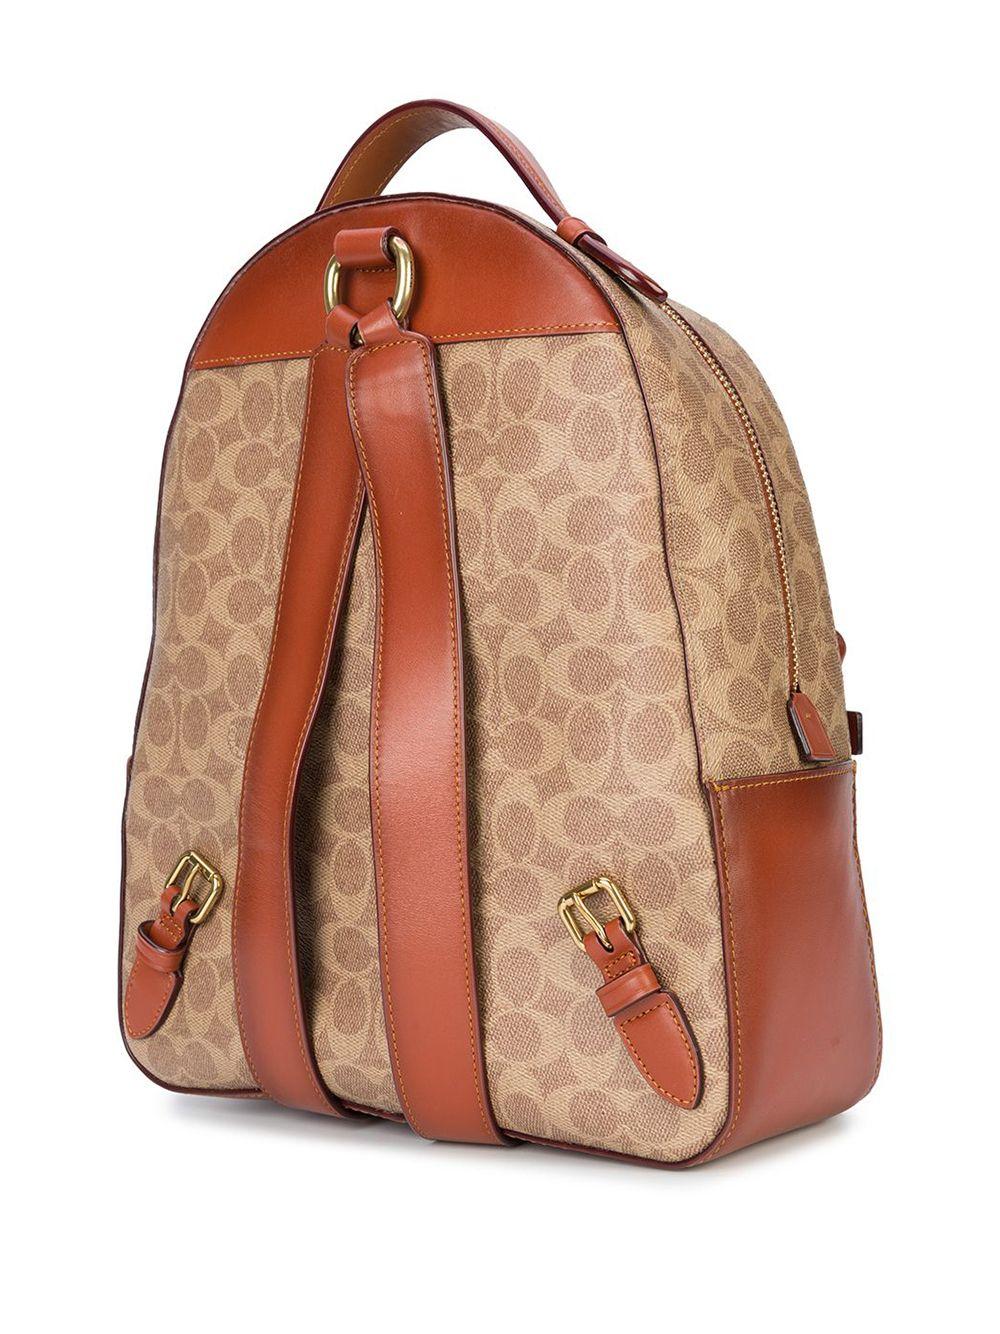 COACH Signature Canvas Campus Backpack in Brown - Lyst